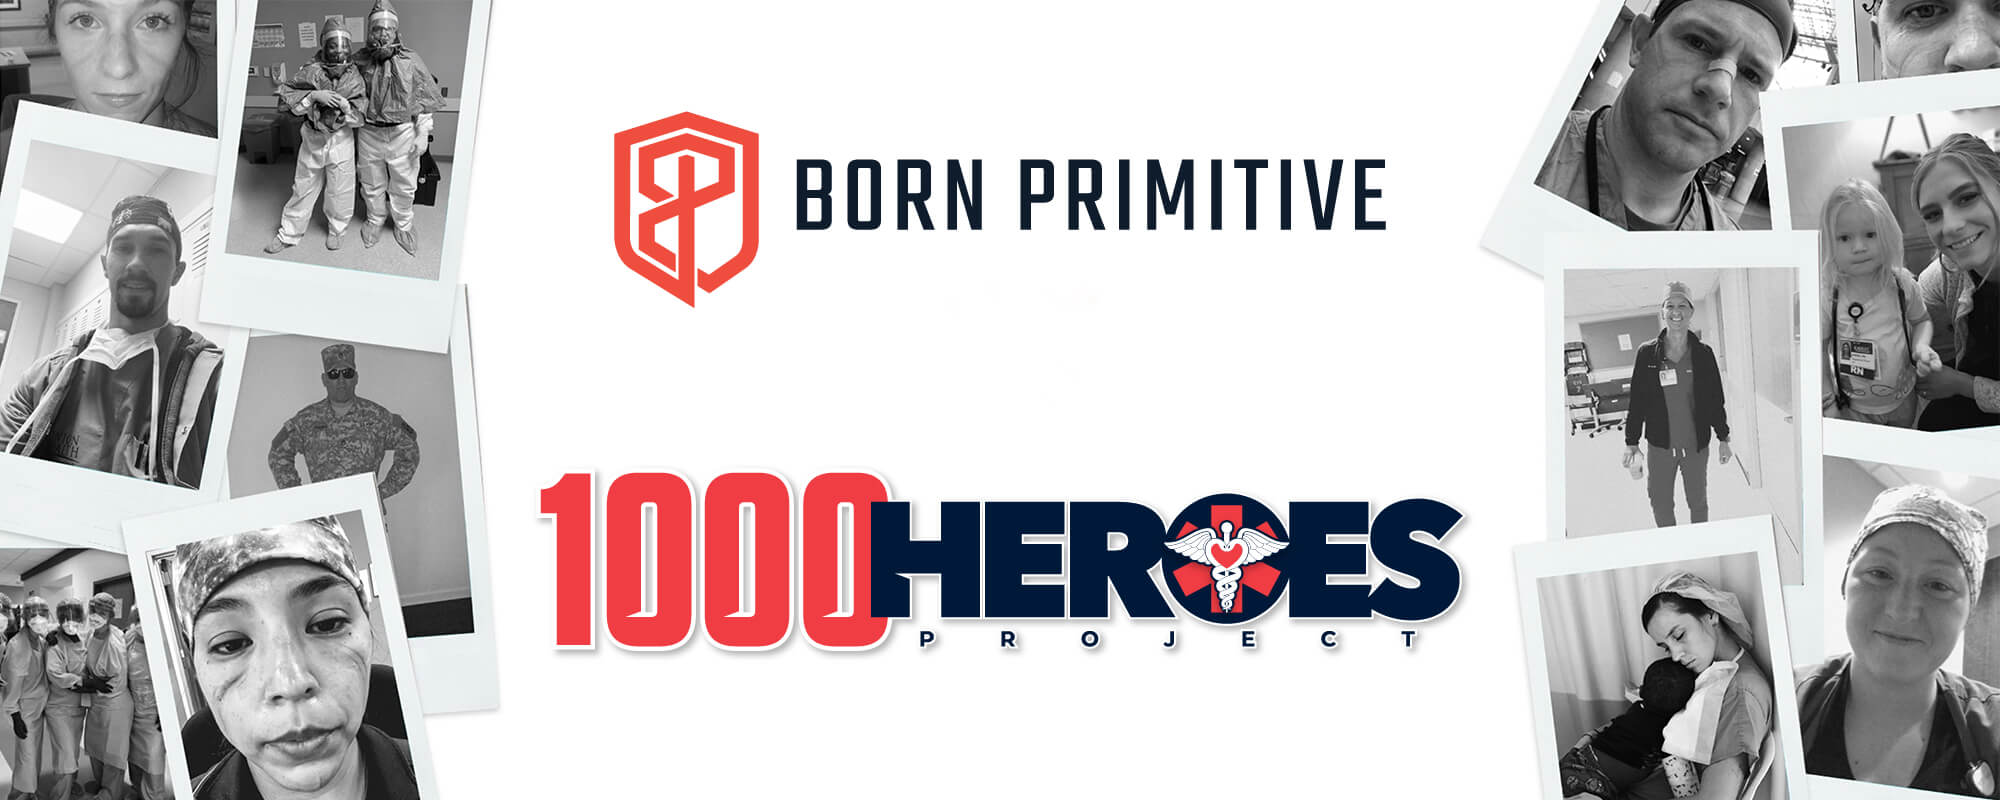 Born Primitive Recognizes Healthcare Workers With 1000 Heroes Project